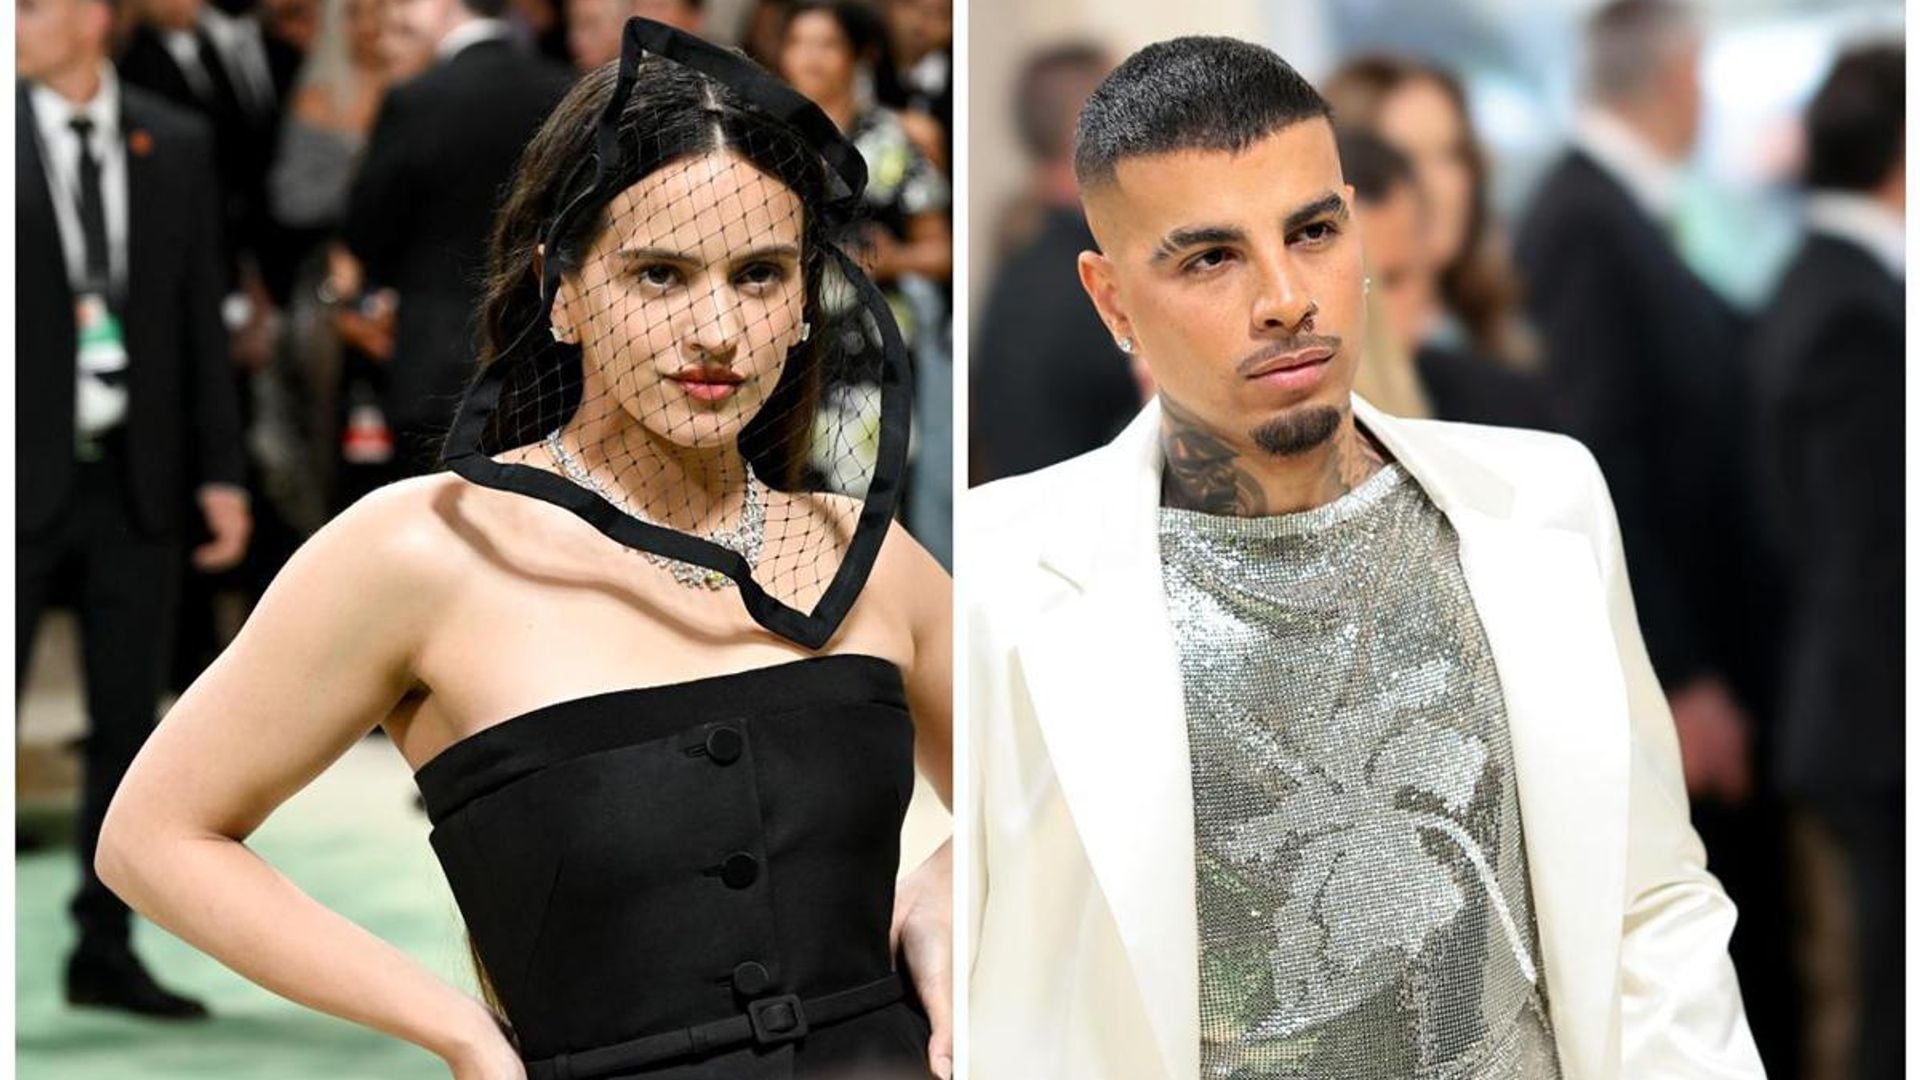 Rosalia and Rauw Alejandro at the Met Gala: Did they cross paths?